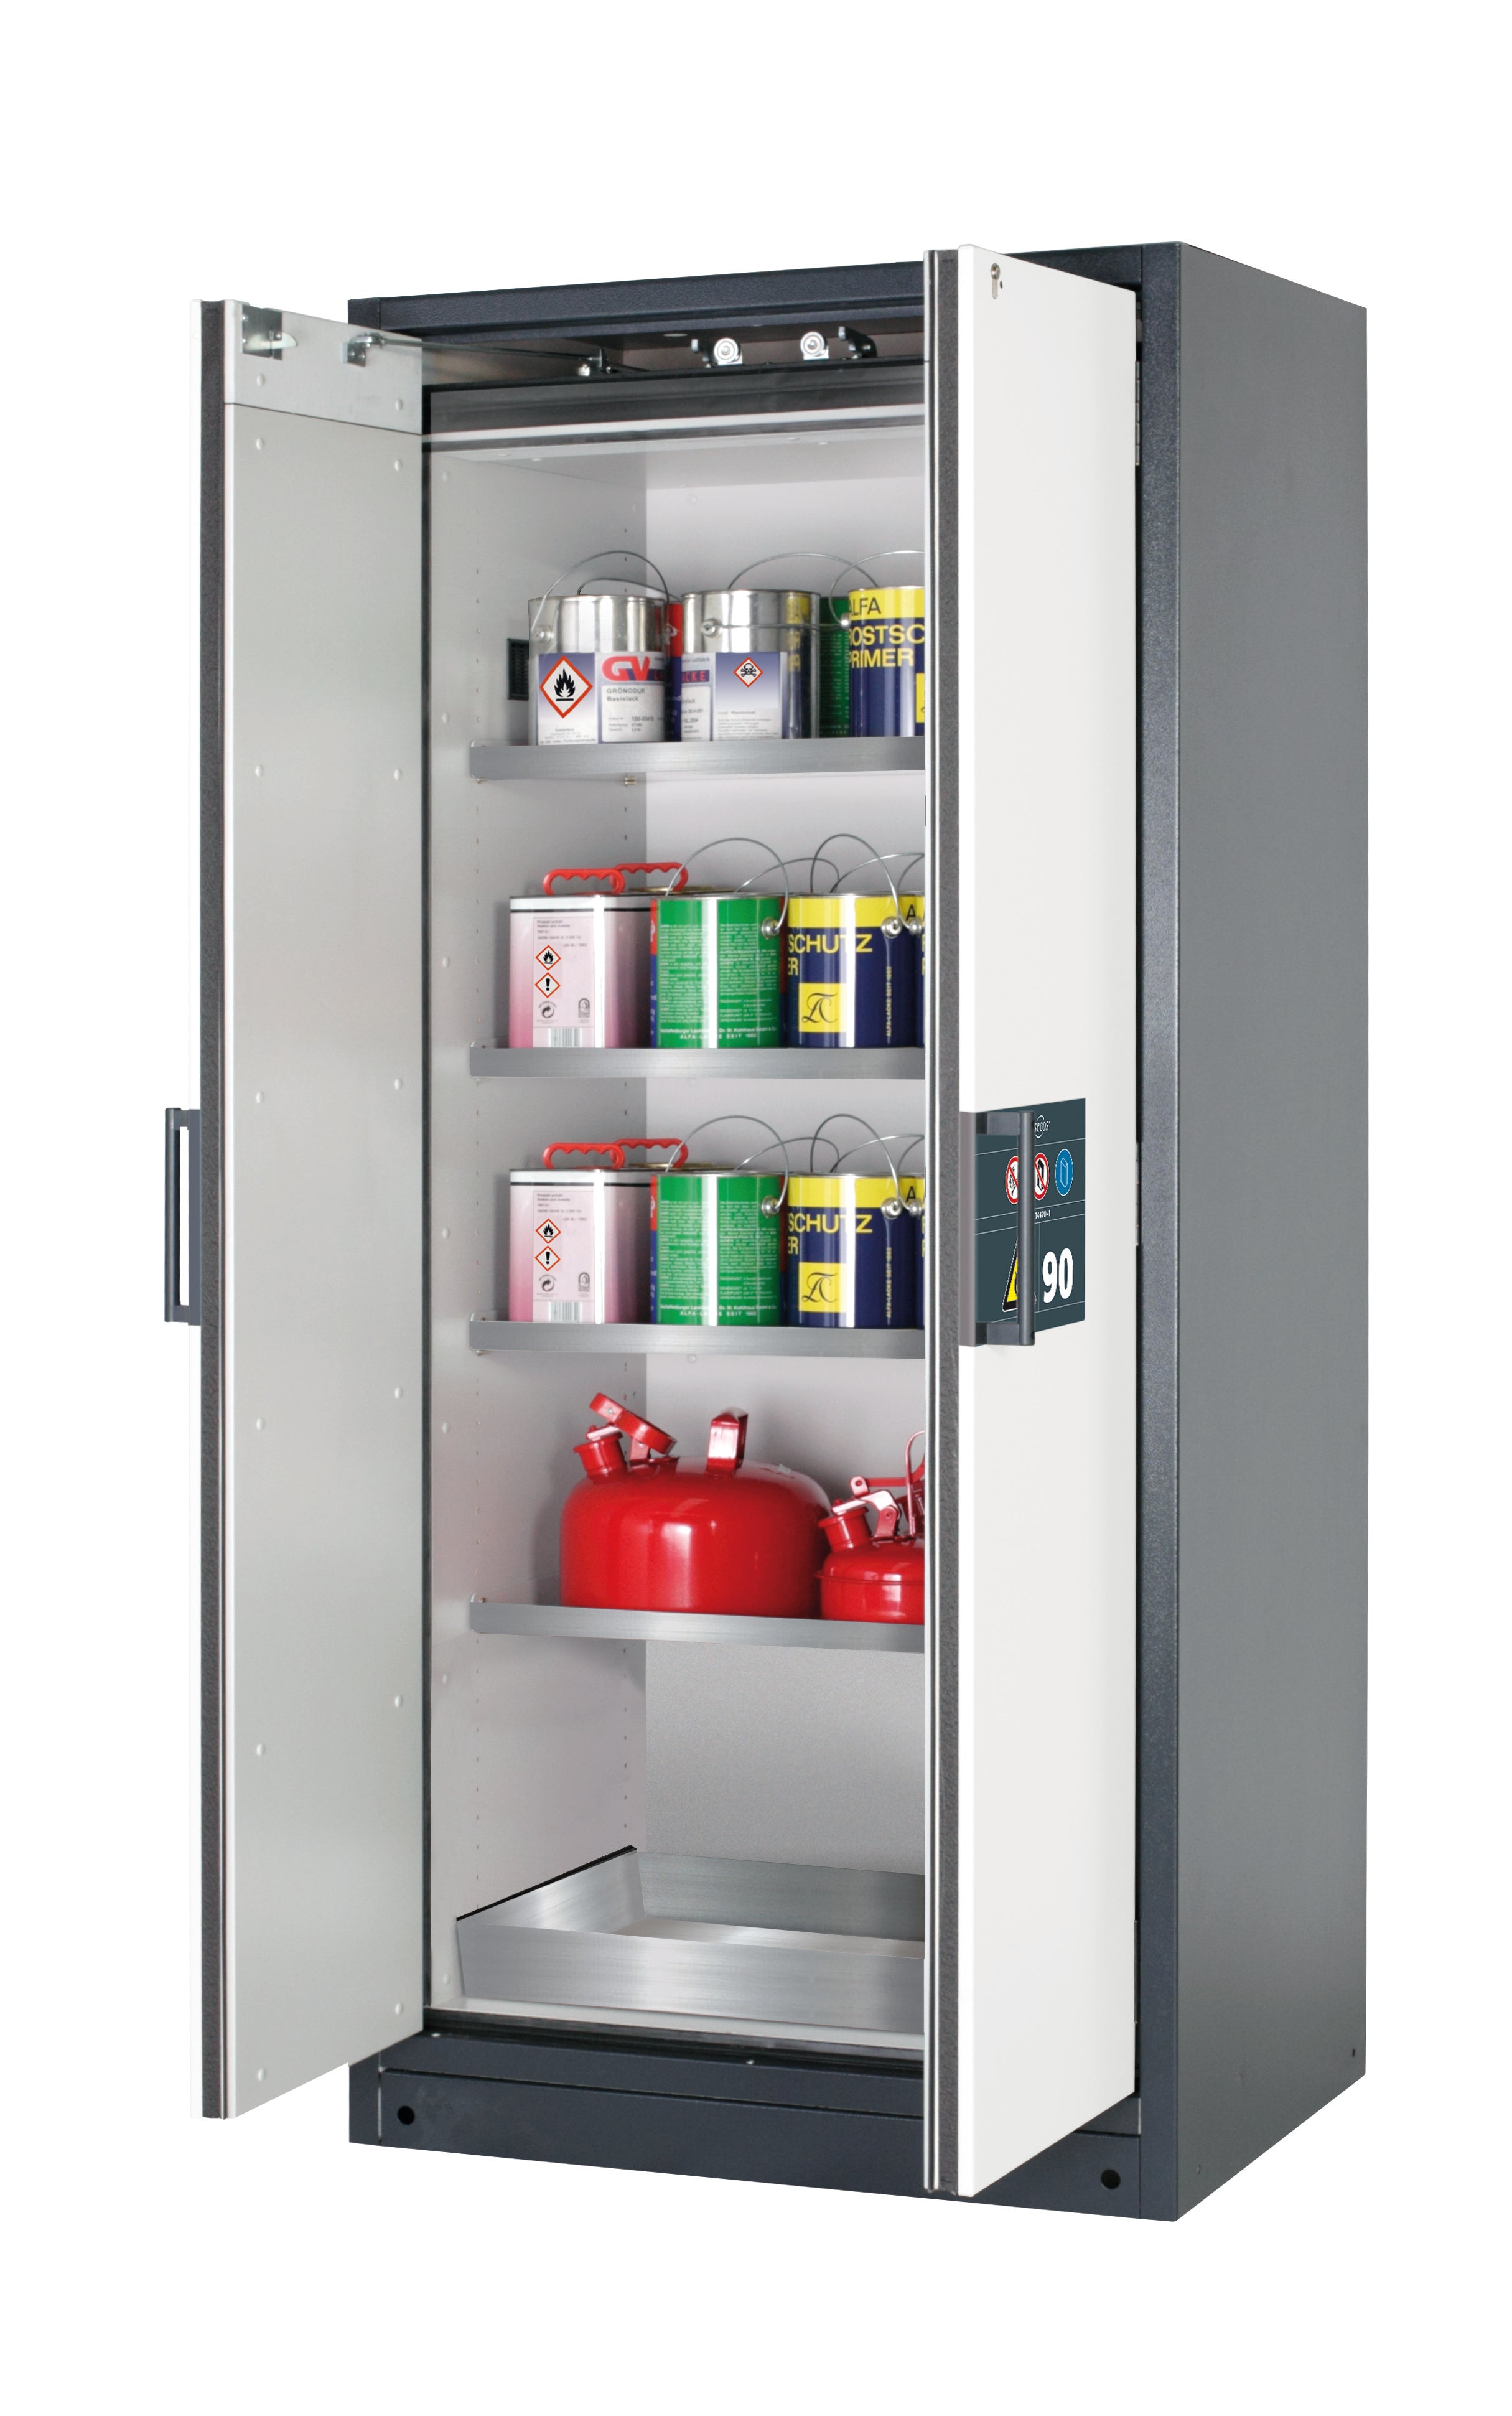 Type 90 safety storage cabinet Q-CLASSIC-90 model Q90.195.090 in pure white RAL 9010 with 4x shelf standard (stainless steel 1.4301),